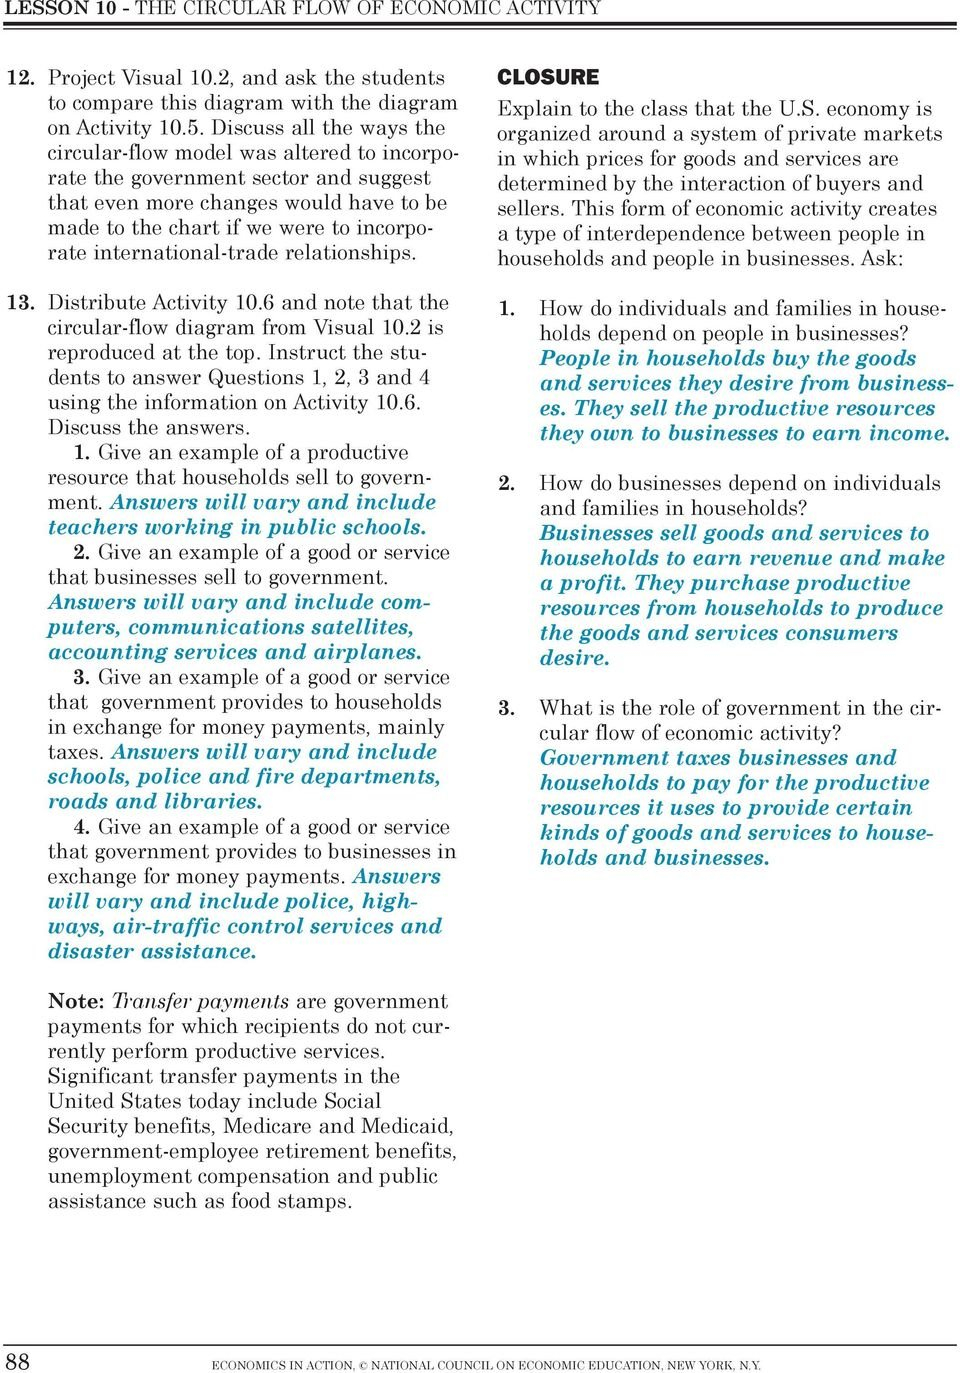 Lesson 10  The Circular Flow Of Economic Activity  Pdf Intended For Circular Flow Of Economic Activity Worksheet Answers